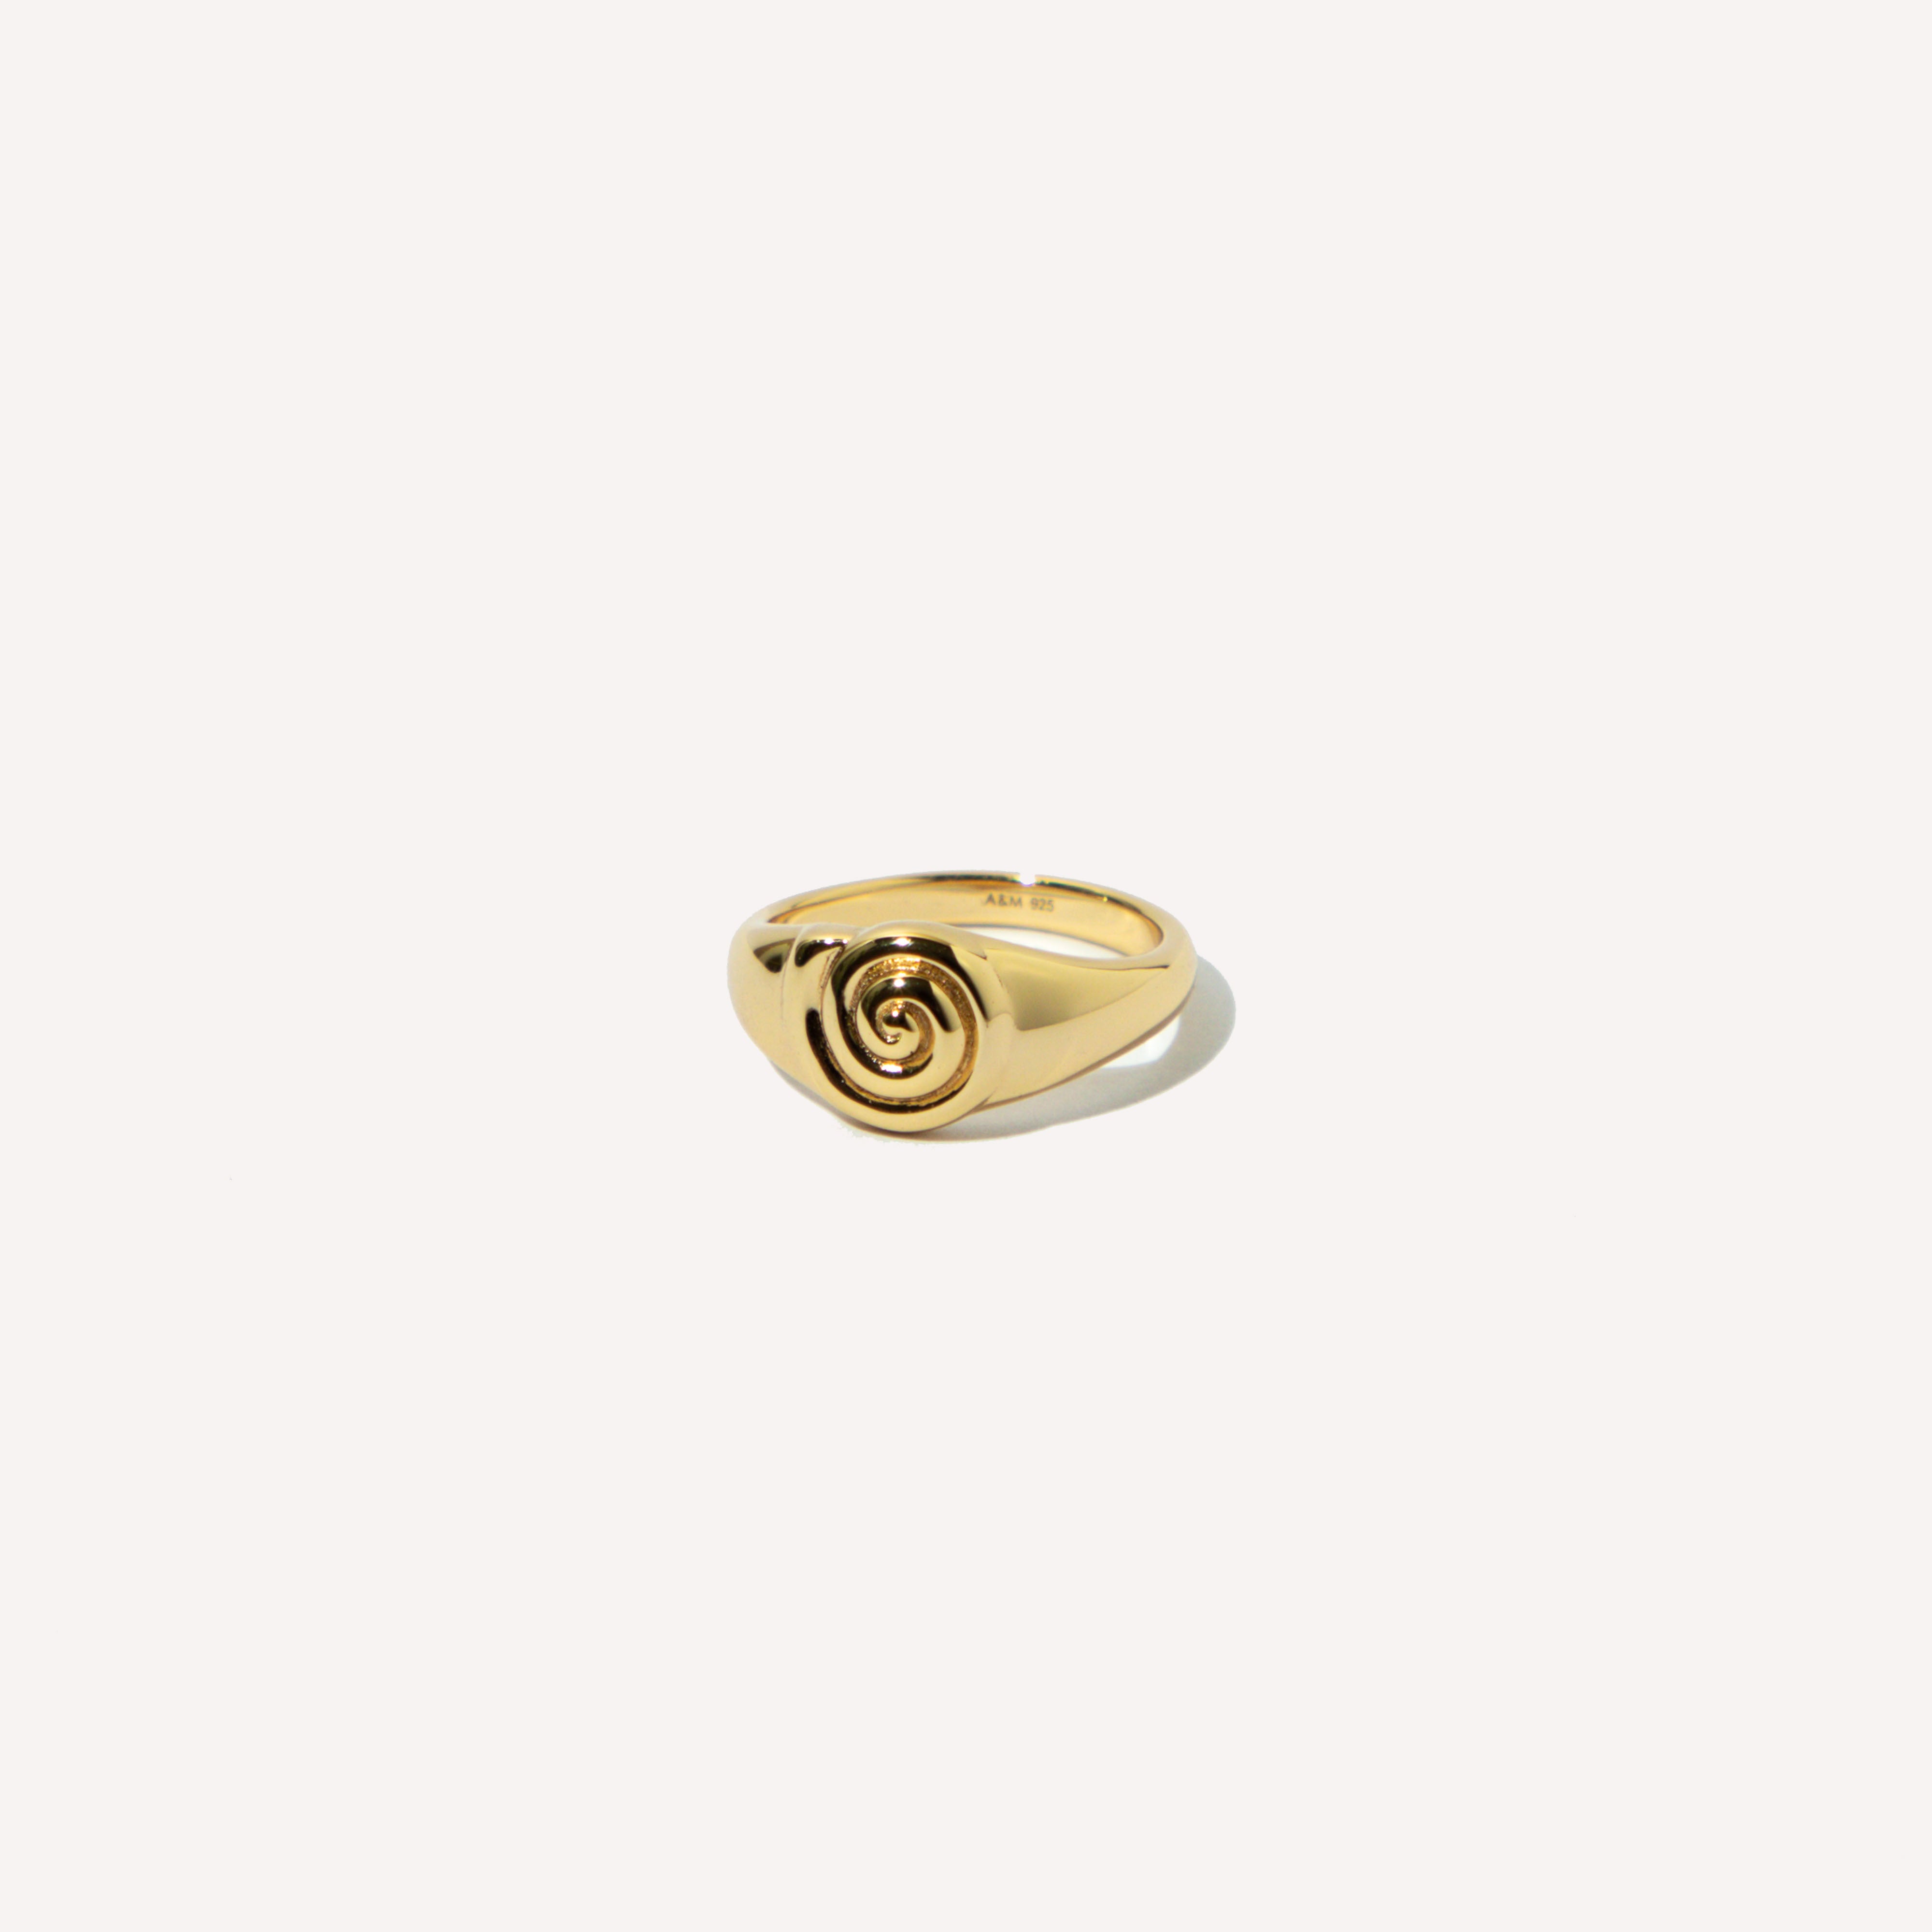 Shell Signet Ring in Gold